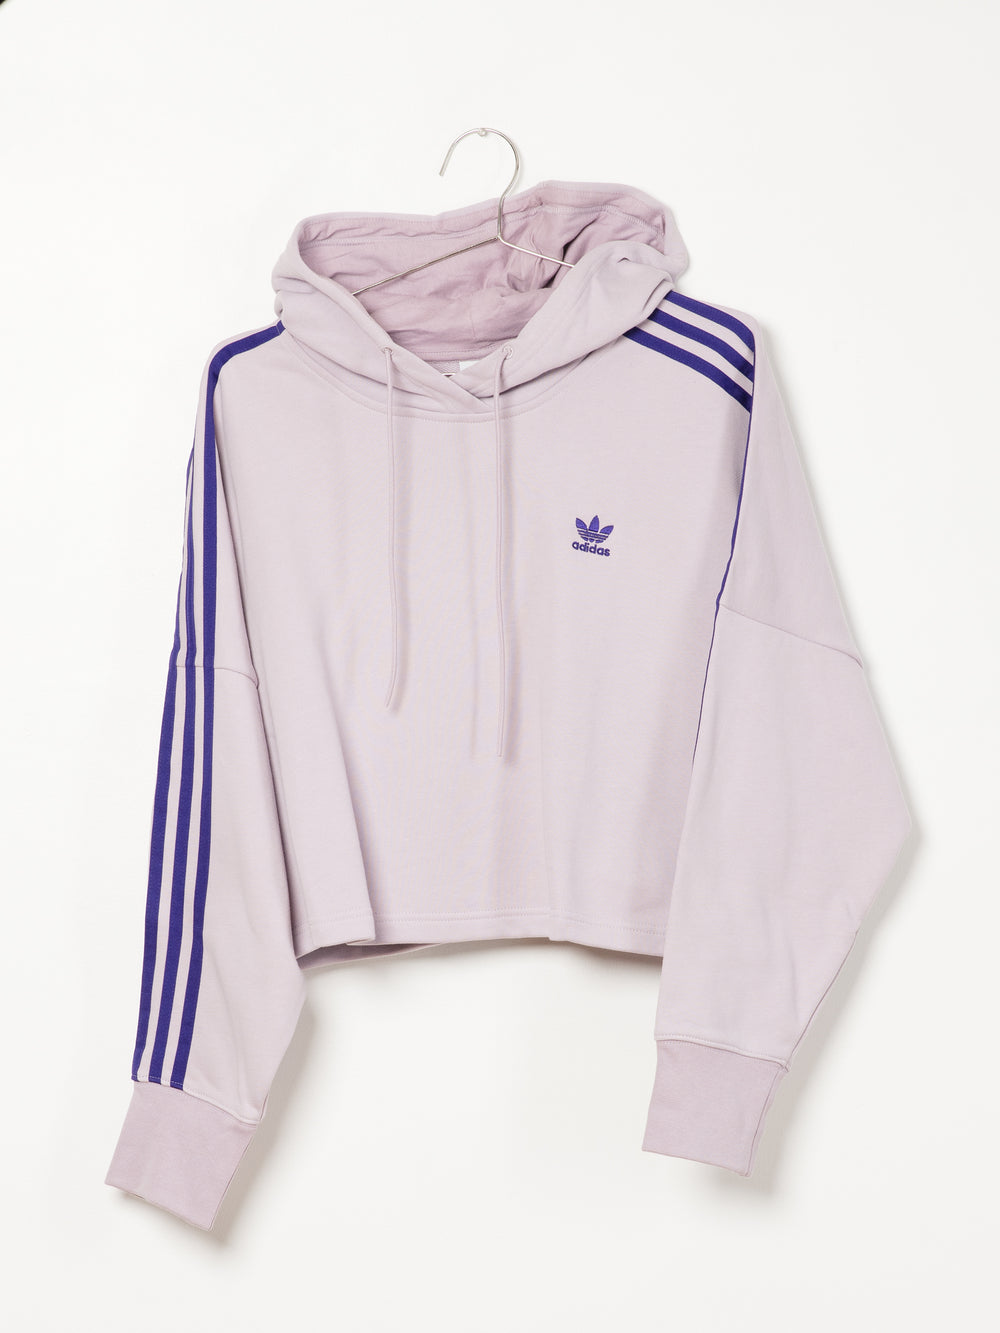 ADIDAS 3 STRIPE CUT OFF CROP PULLOVER HOODIE  - CLEARANCE